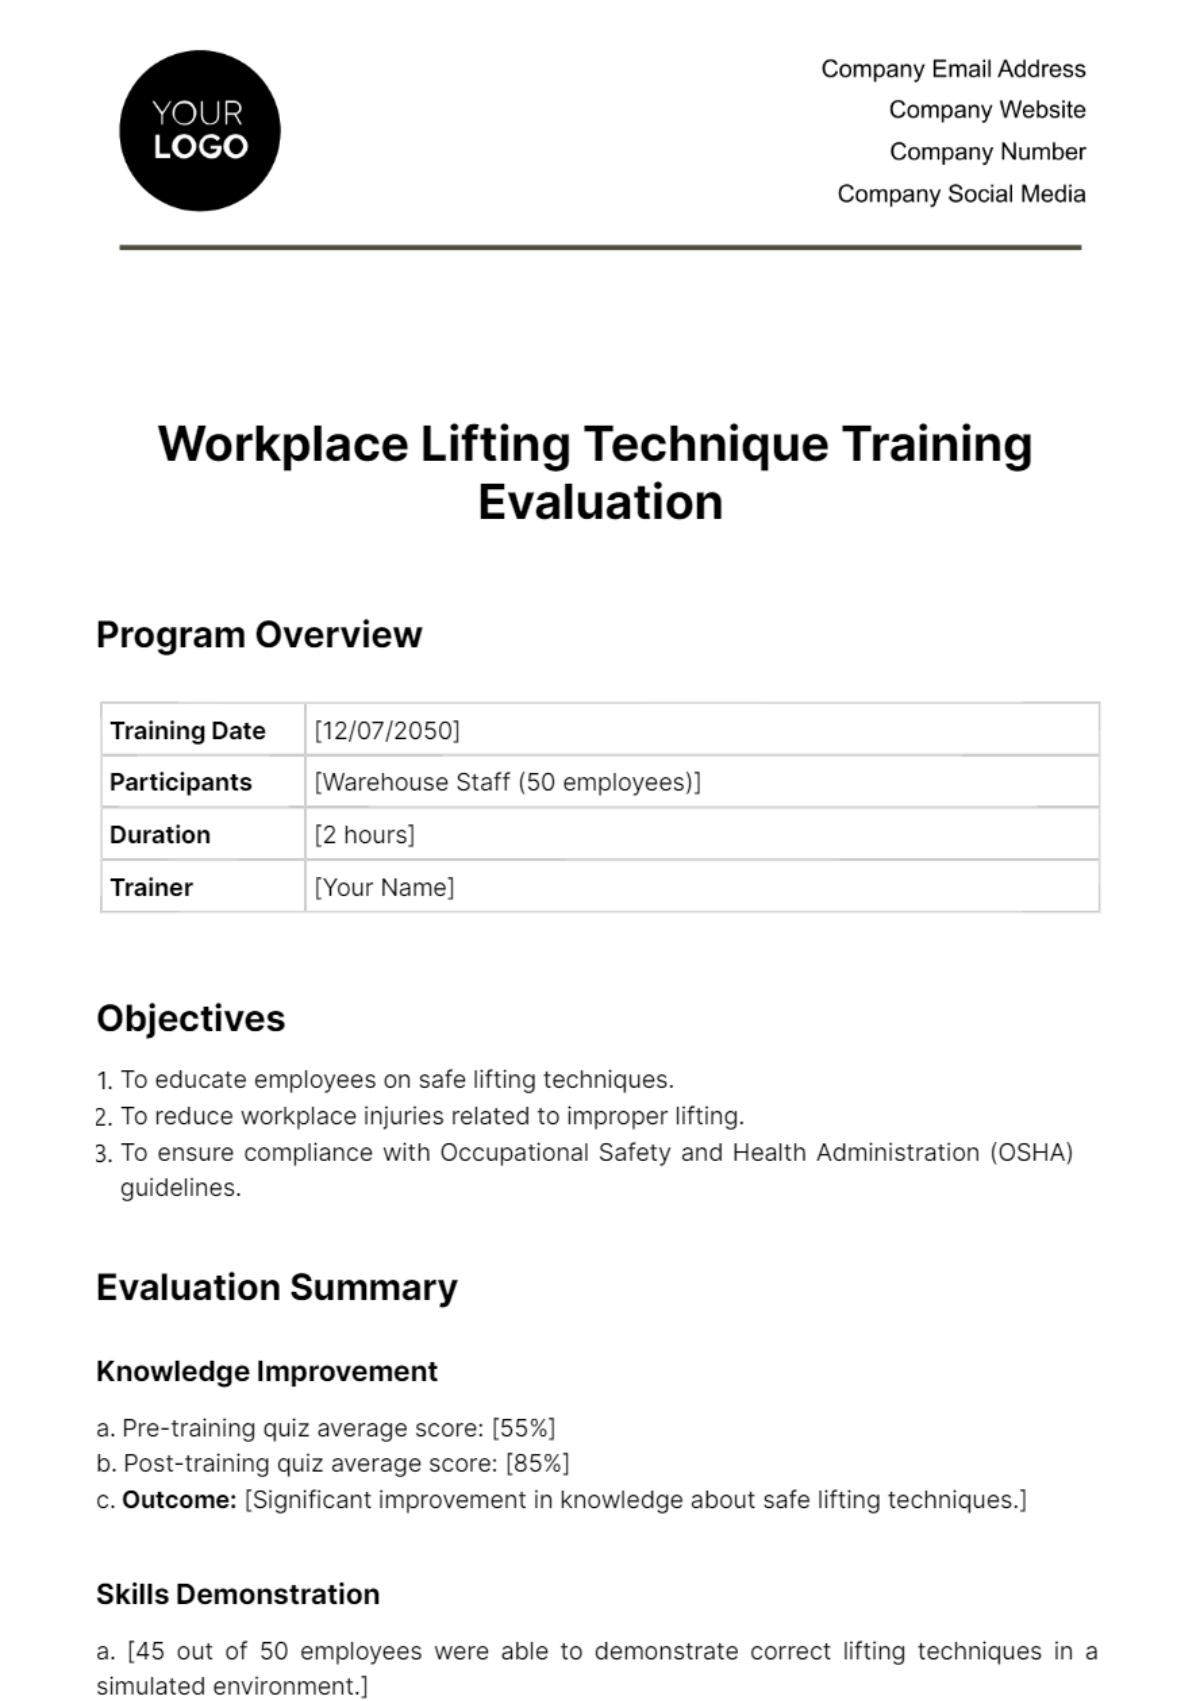 Free Workplace Lifting Technique Training Evaluation Template